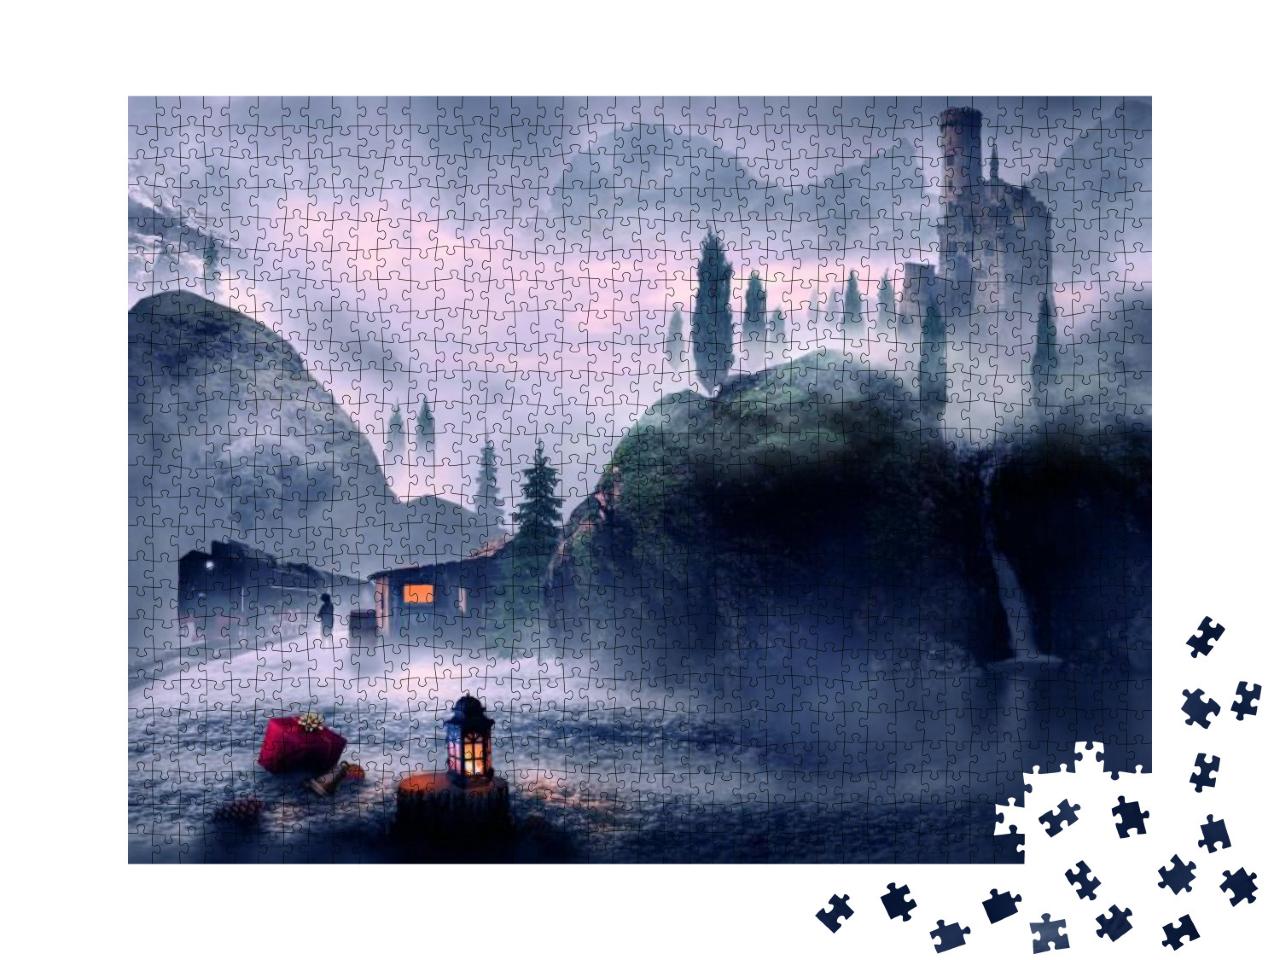 Winter Theme Christmas Lantern & Landscape Fantasy... Jigsaw Puzzle with 1000 pieces